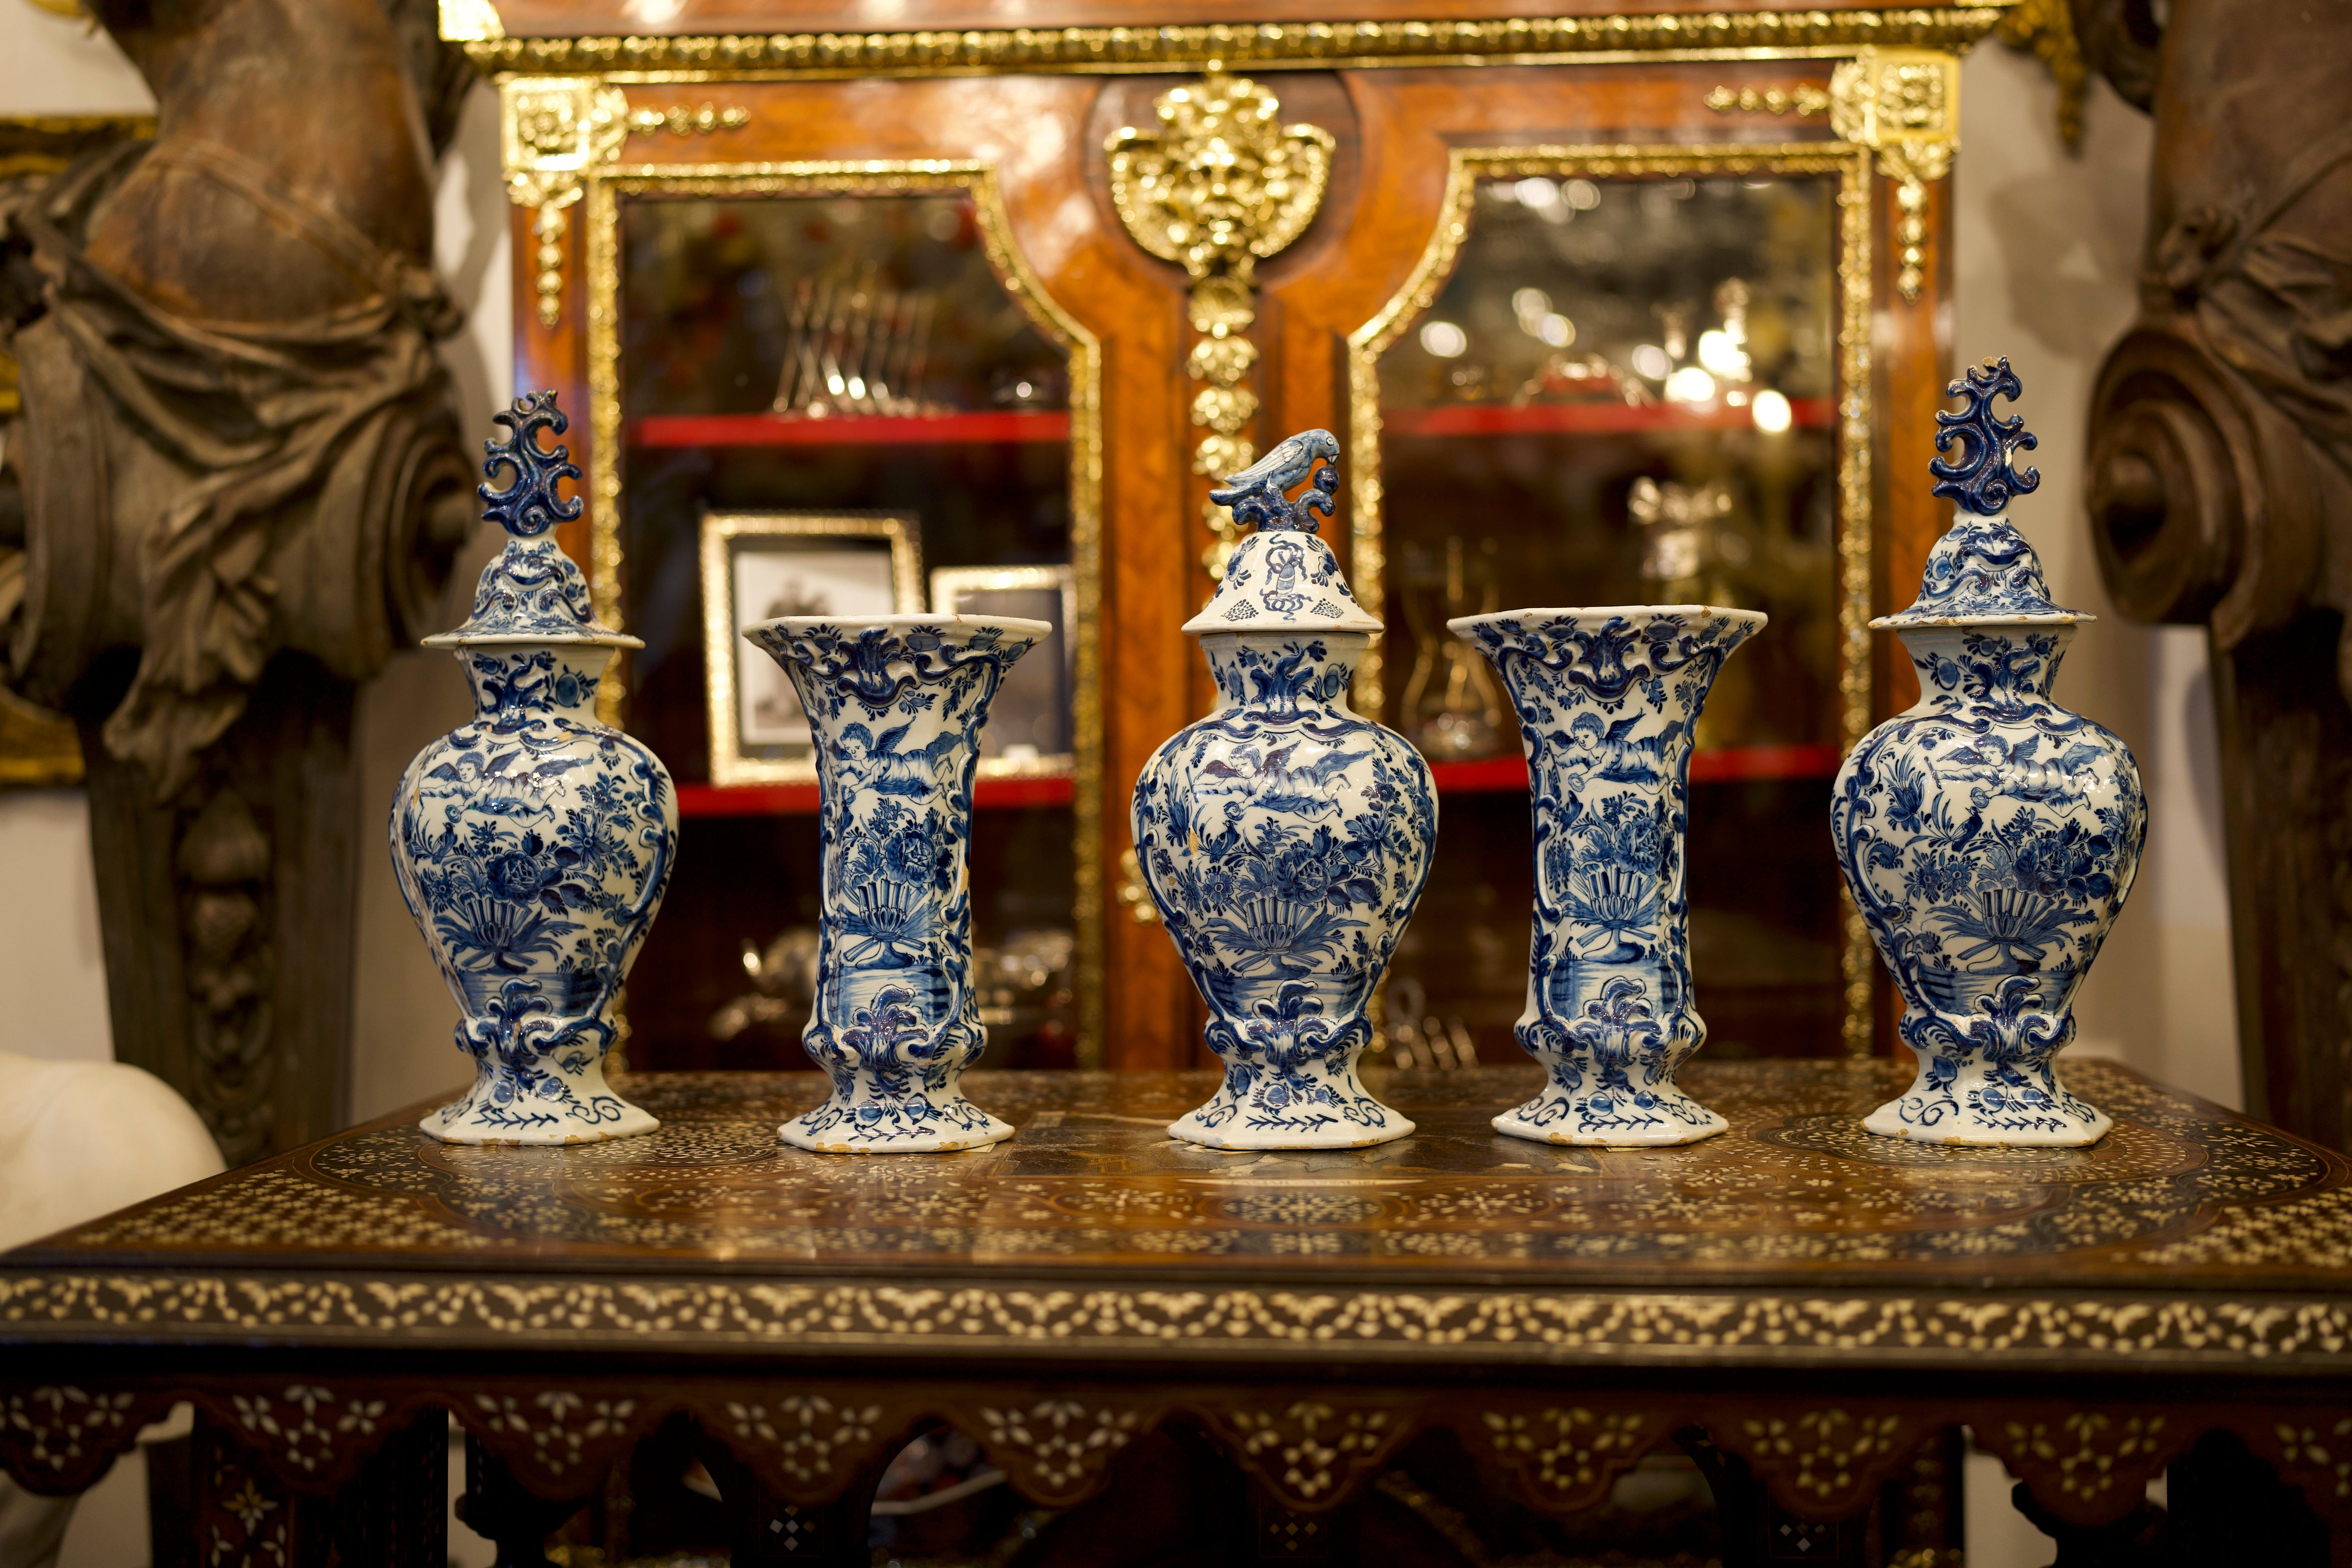 A stunning Garniture Of Mid 18th Century Dutch Delft Blue And White Vases.
The set molded with petal-form segments throughout and each raised on a foot with convex profile above a set-in foot ring encircling the recessed base centered with lingzhi